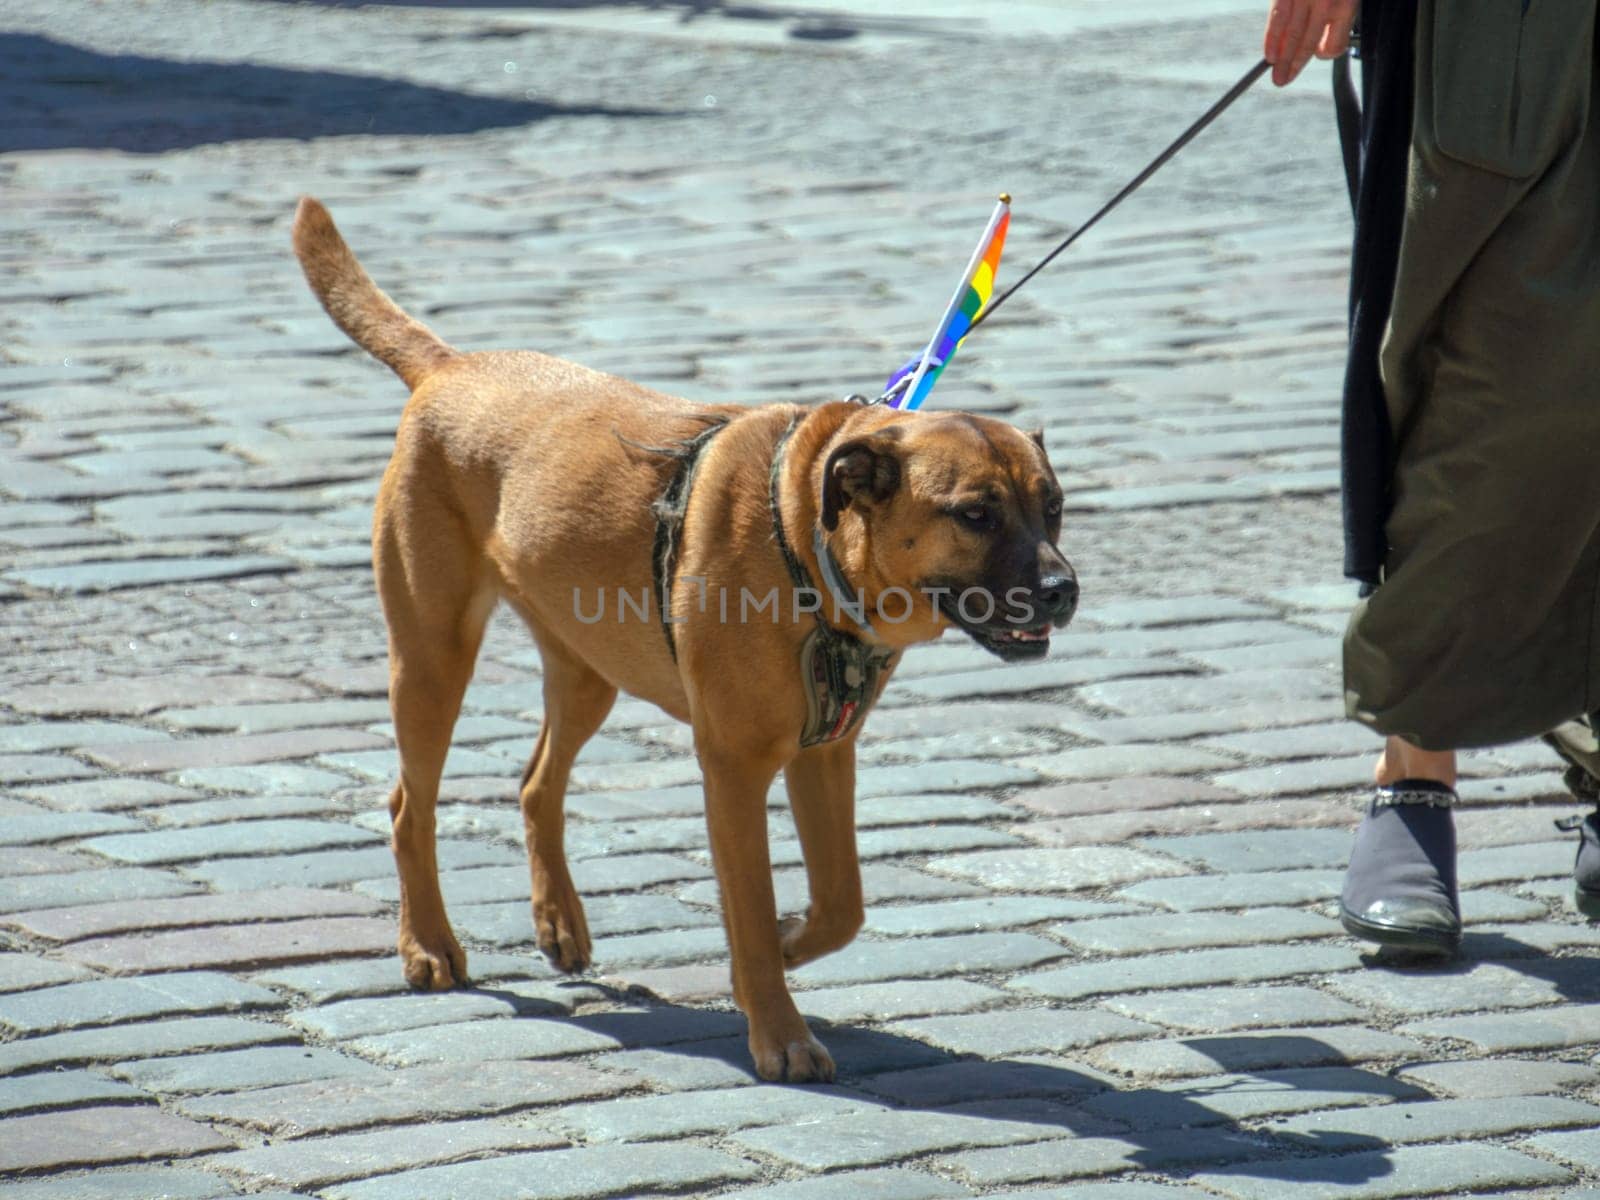 A brown dog takes part in the annual gay parade of the LGBT community with a bright scarf around his neck. by Dimidov27@mail.ru